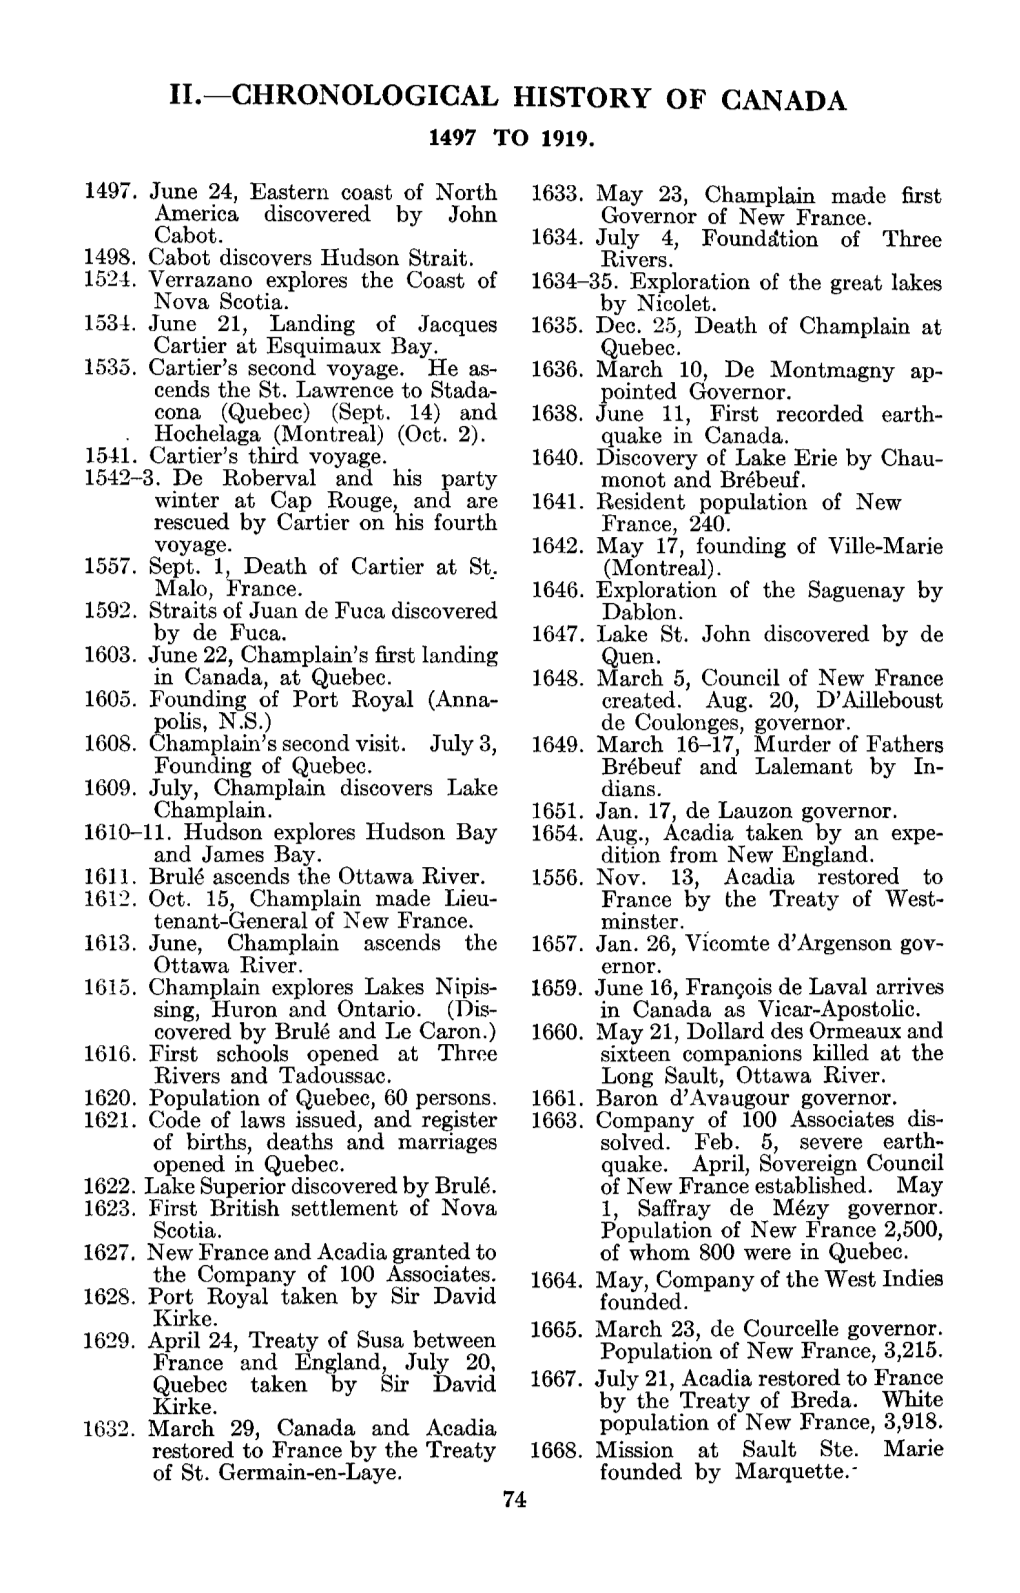 Chronological History of Canada 1497-1919